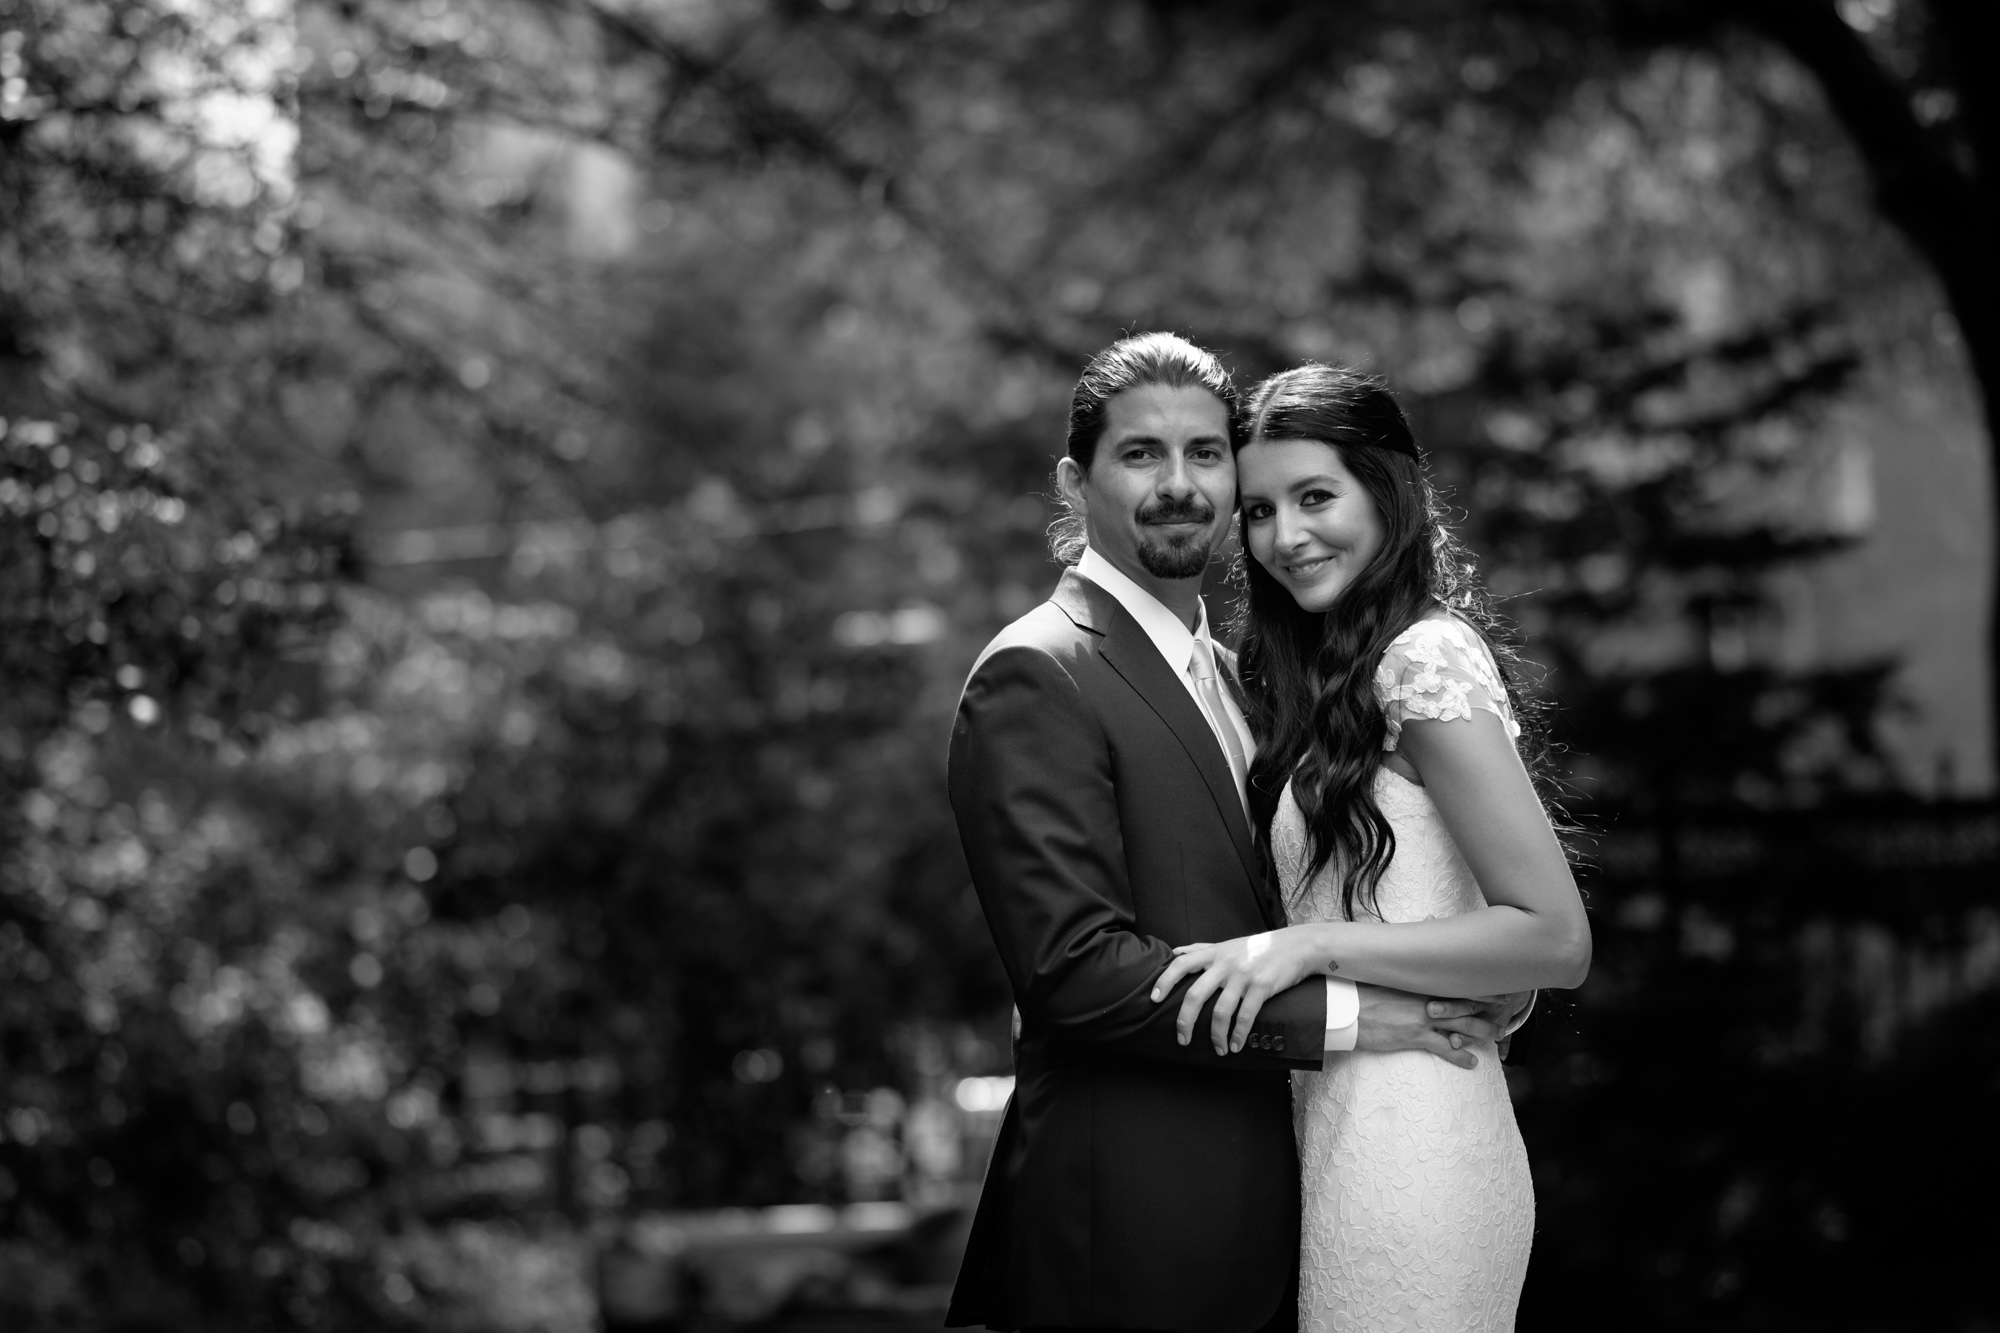  Danni + Felipe pose for a formal wedding portrait at Osgood Hall before their wedding at the Fermenting Cellar in Toronto.&nbsp; 